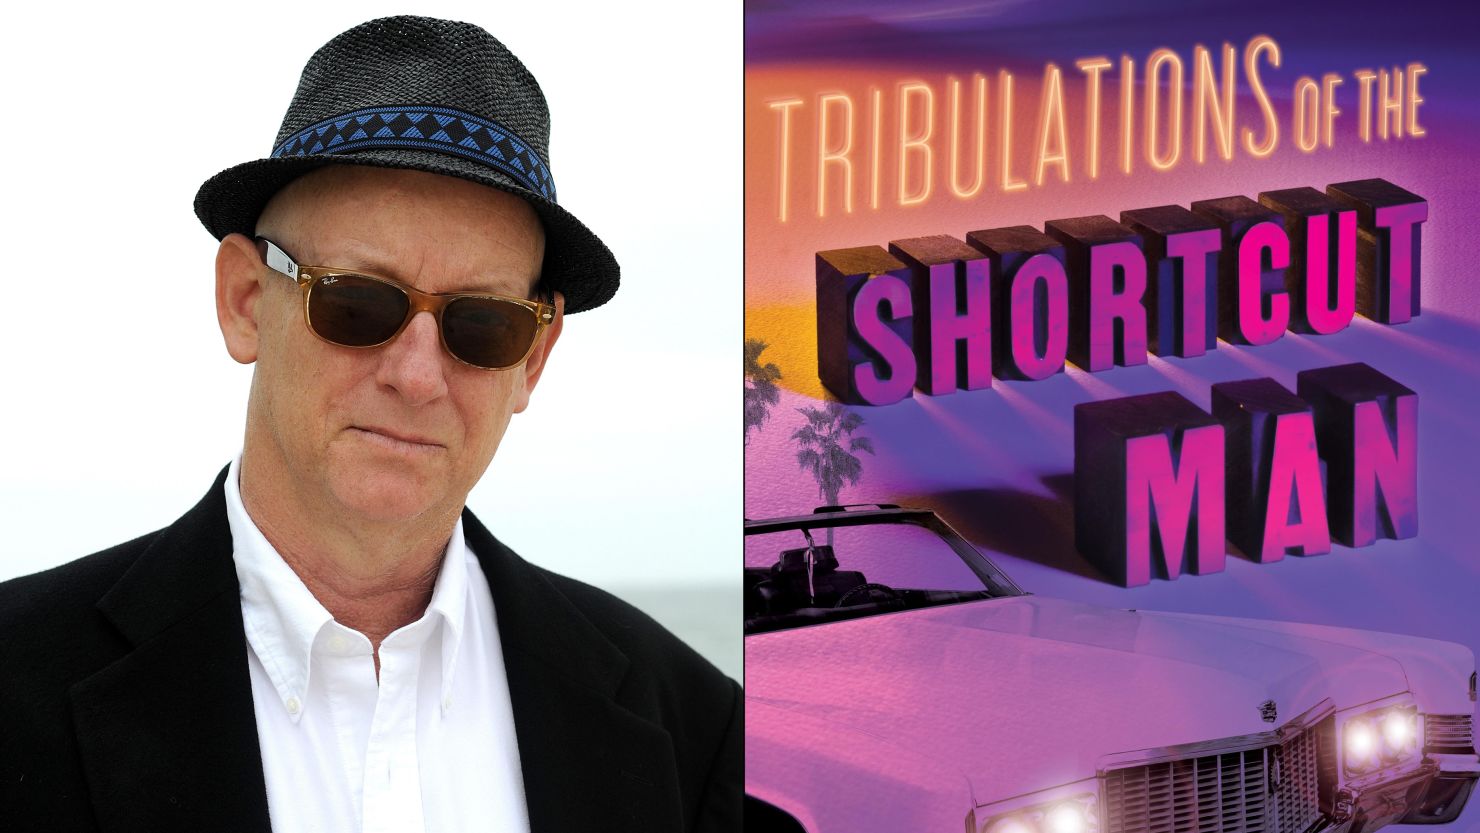 P.G. Sturges just released his new novel, "Tribulations of the Shortcut Man."